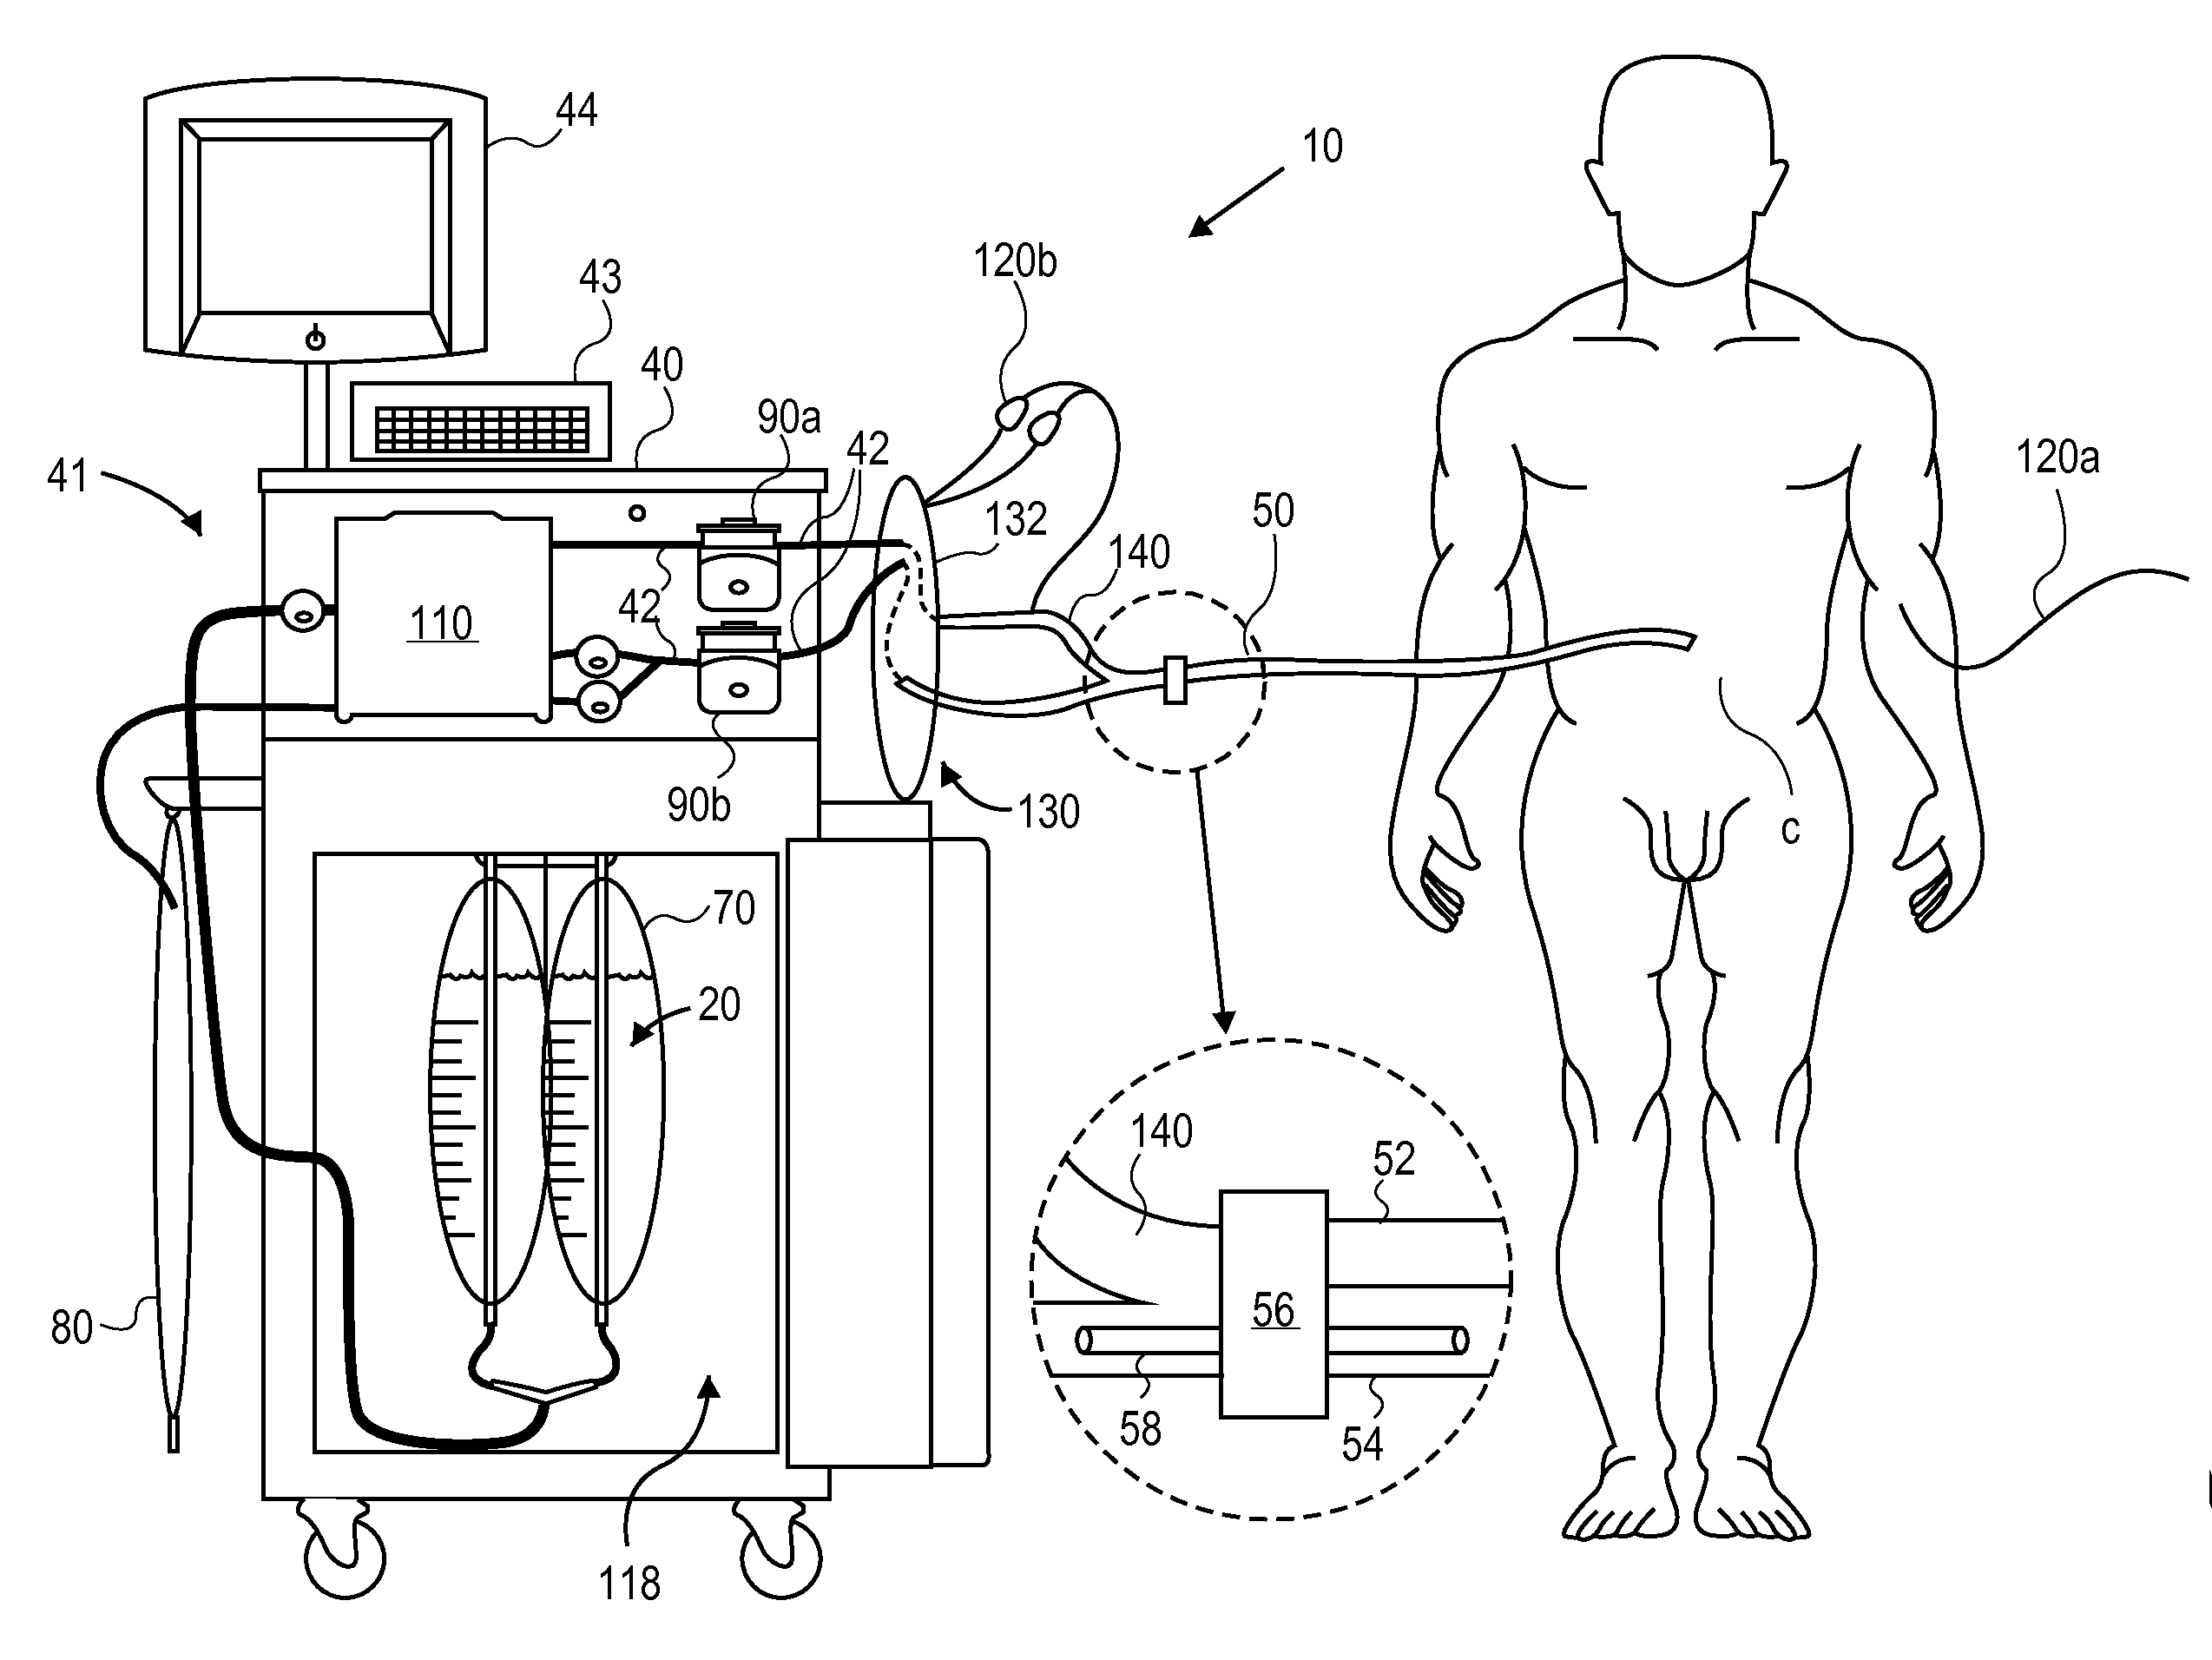 Method and Apparatus for Inducing Therapeutic Hypothermia